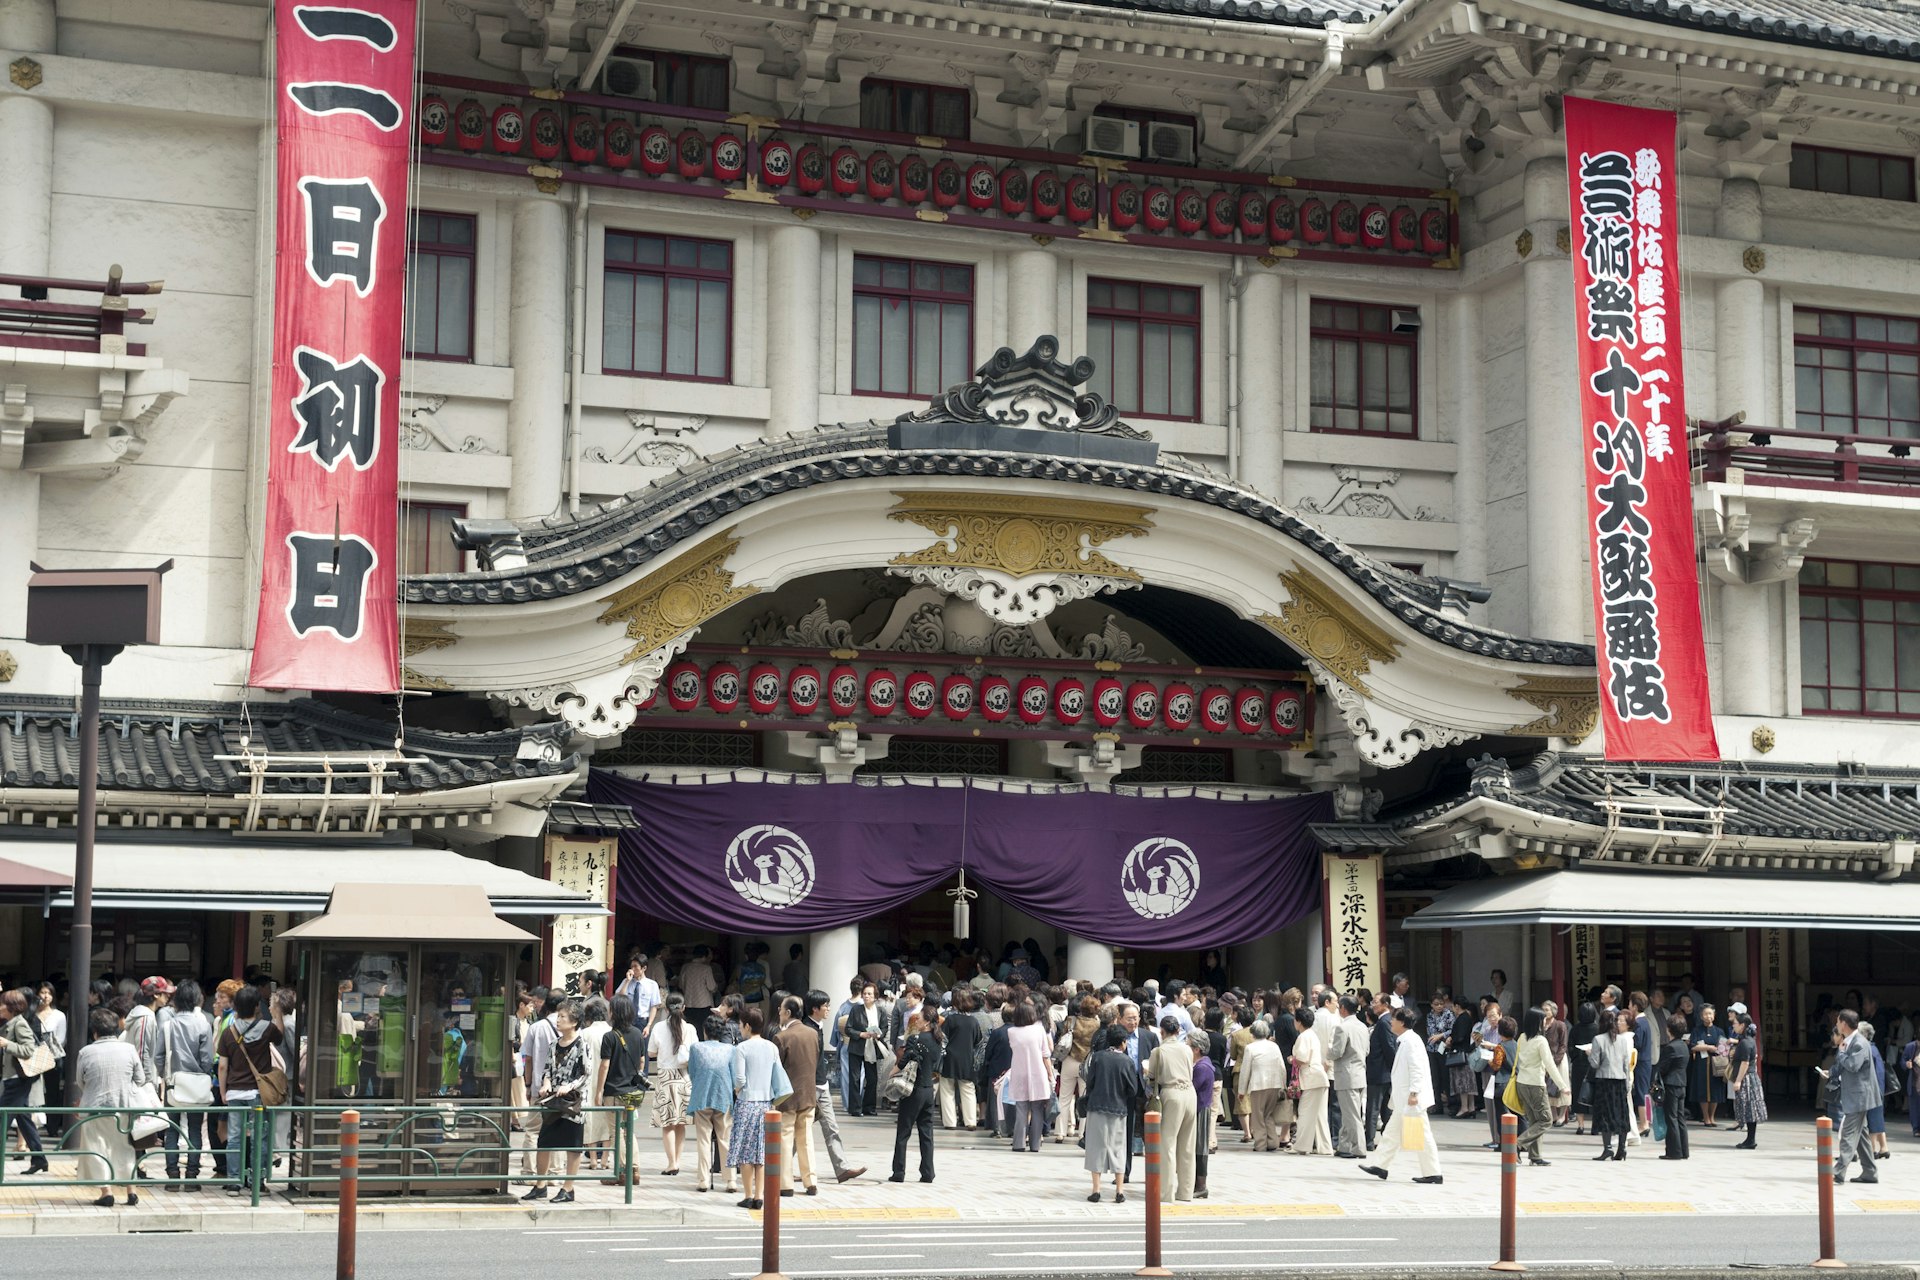 Theatre goers queueing up outside the front of the Ginza theatre, Japan’s most famous and grandest Kabuki theatre, to see a show